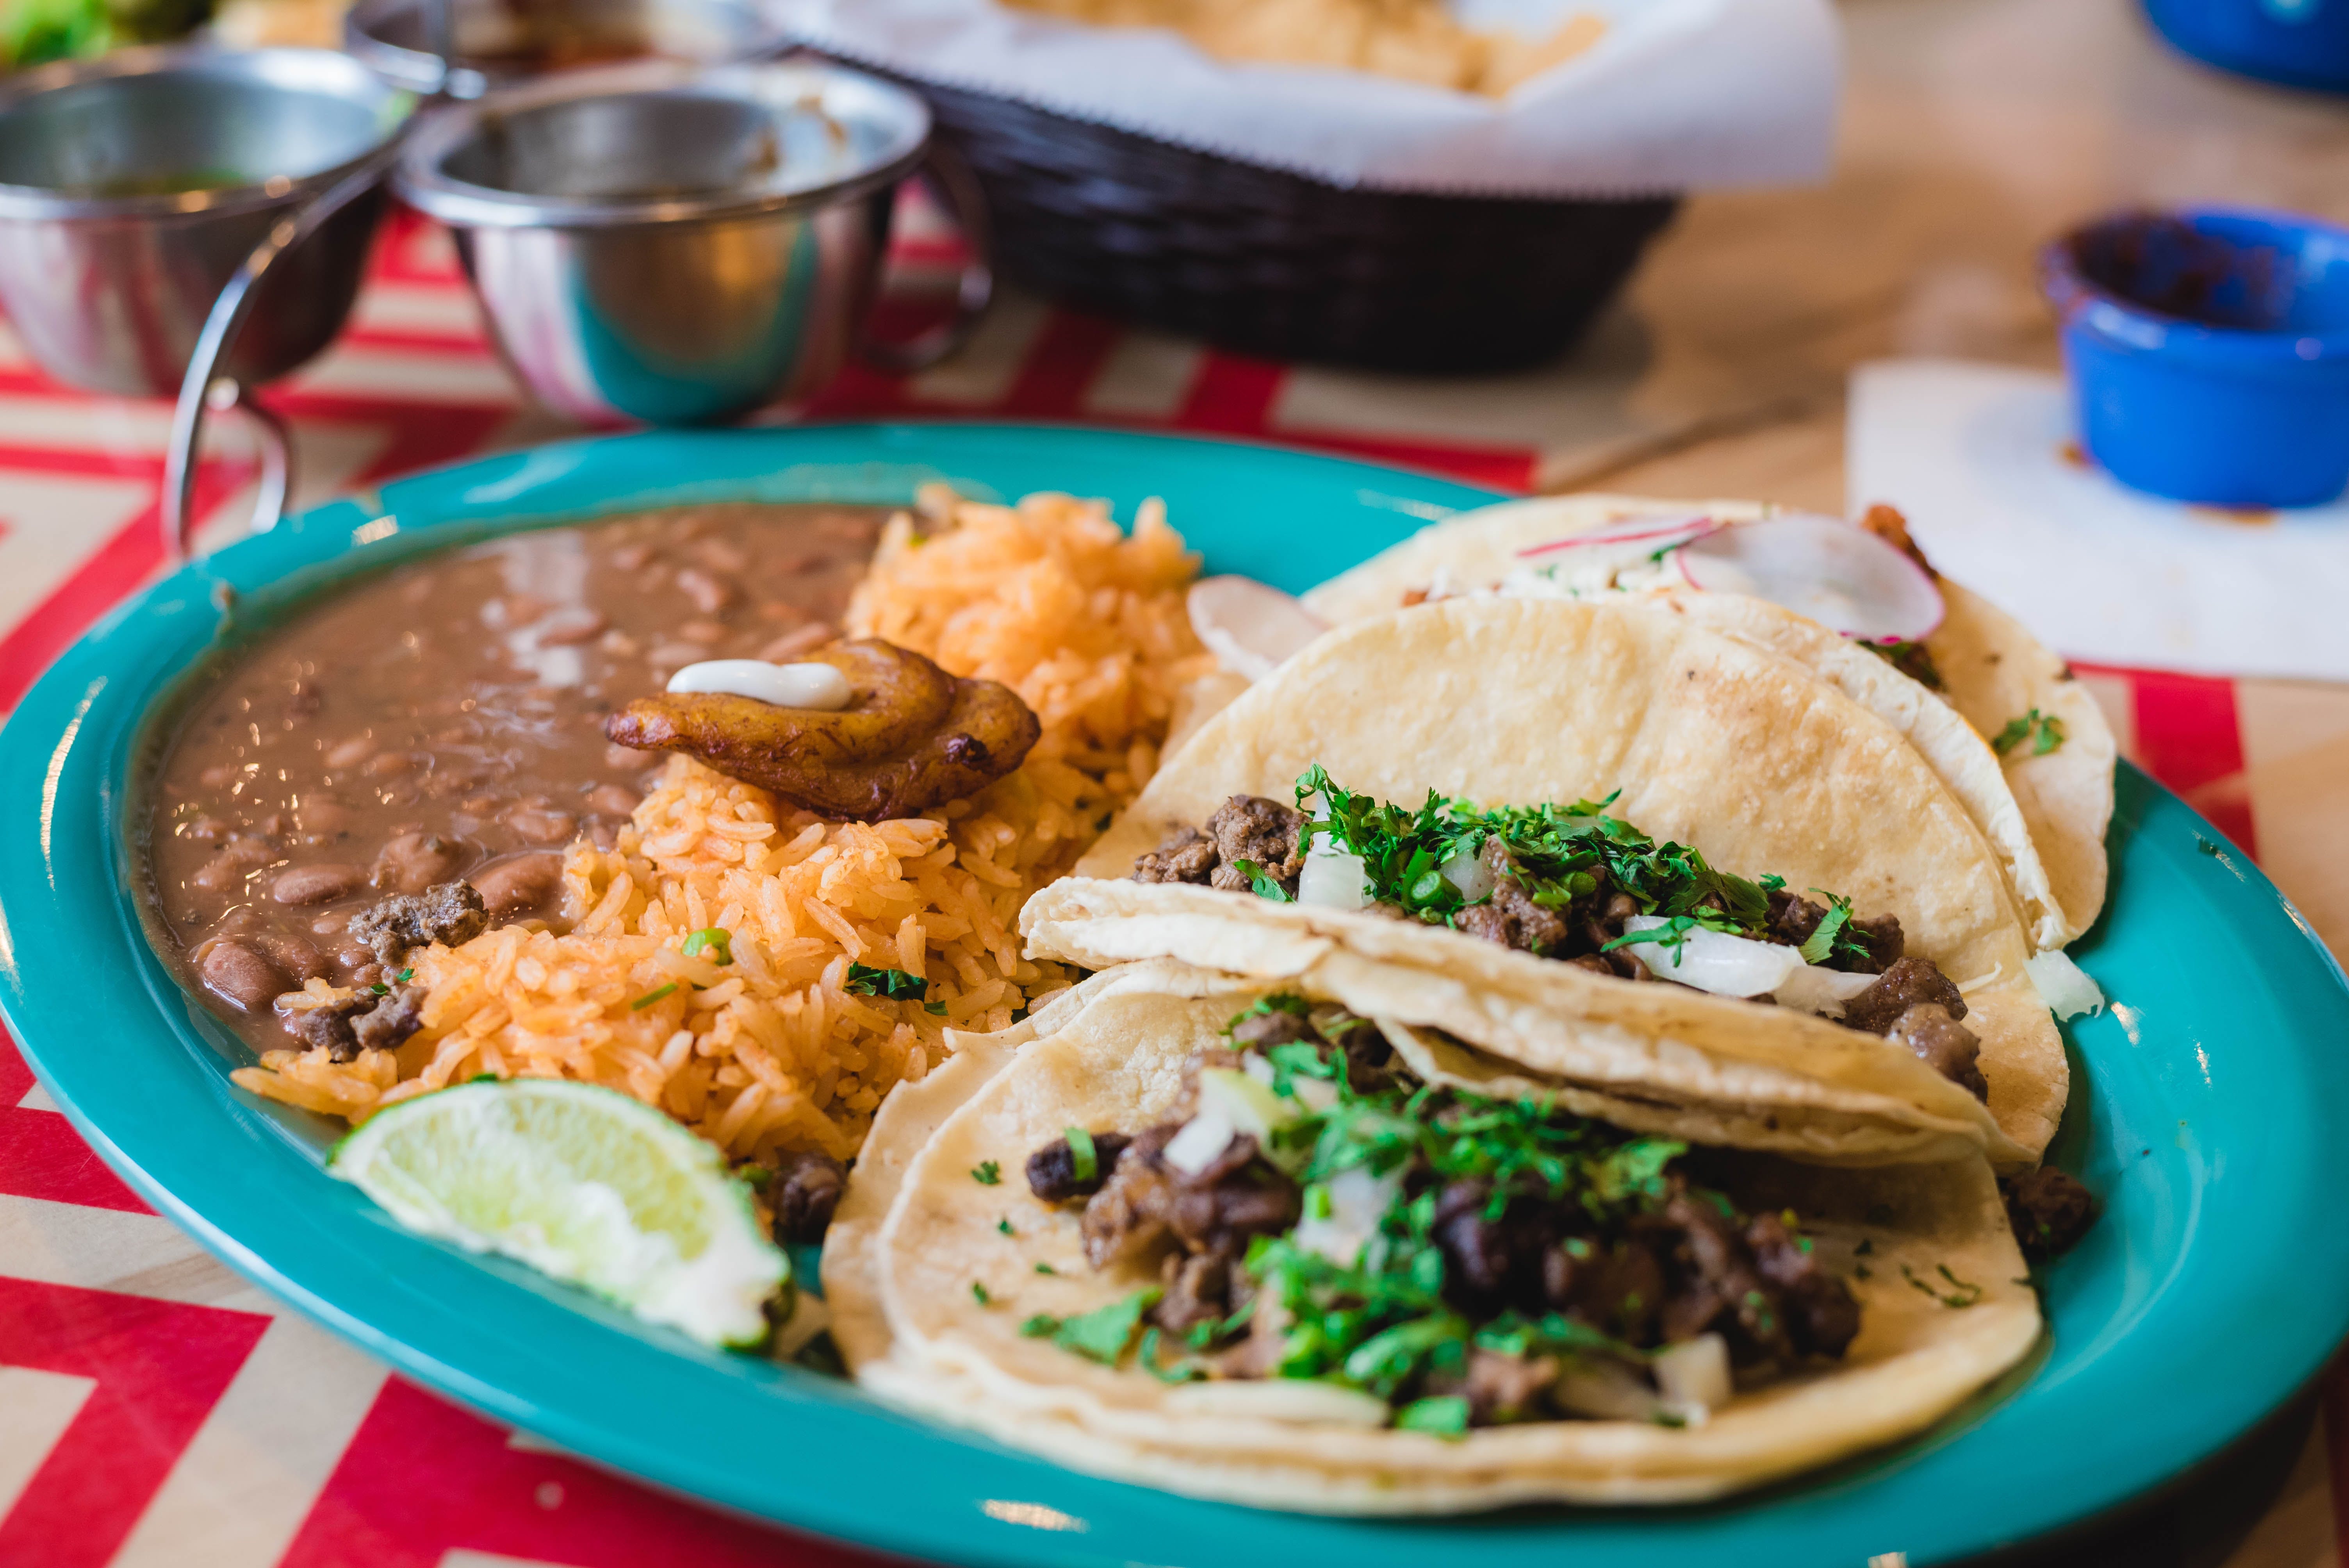 Sioux Falls Top 7 BEST Mexican Restaurants Places to Eat